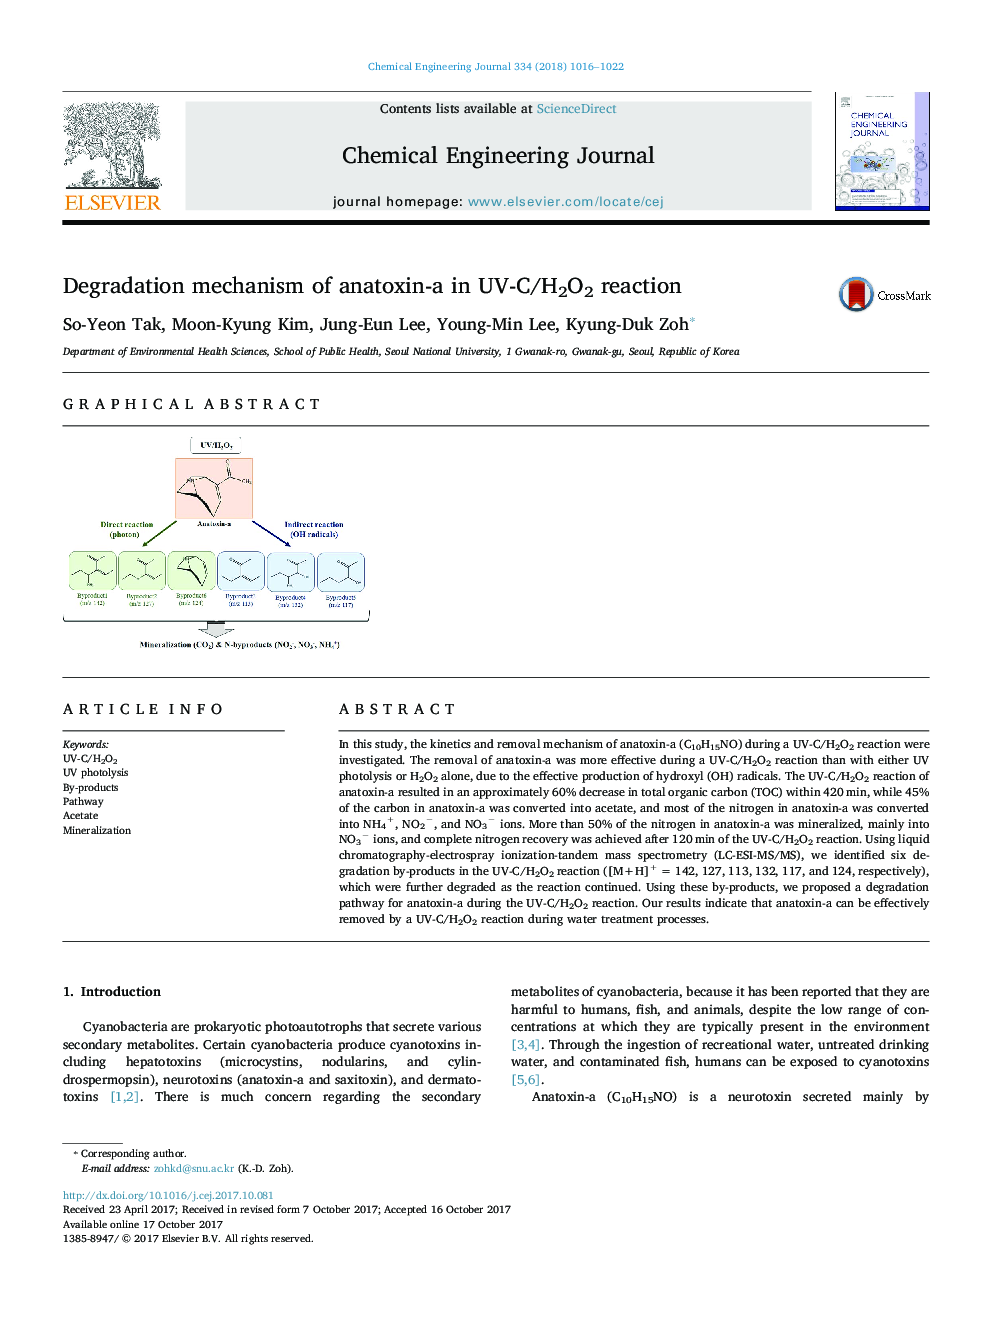 Degradation mechanism of anatoxin-a in UV-C/H2O2 reaction